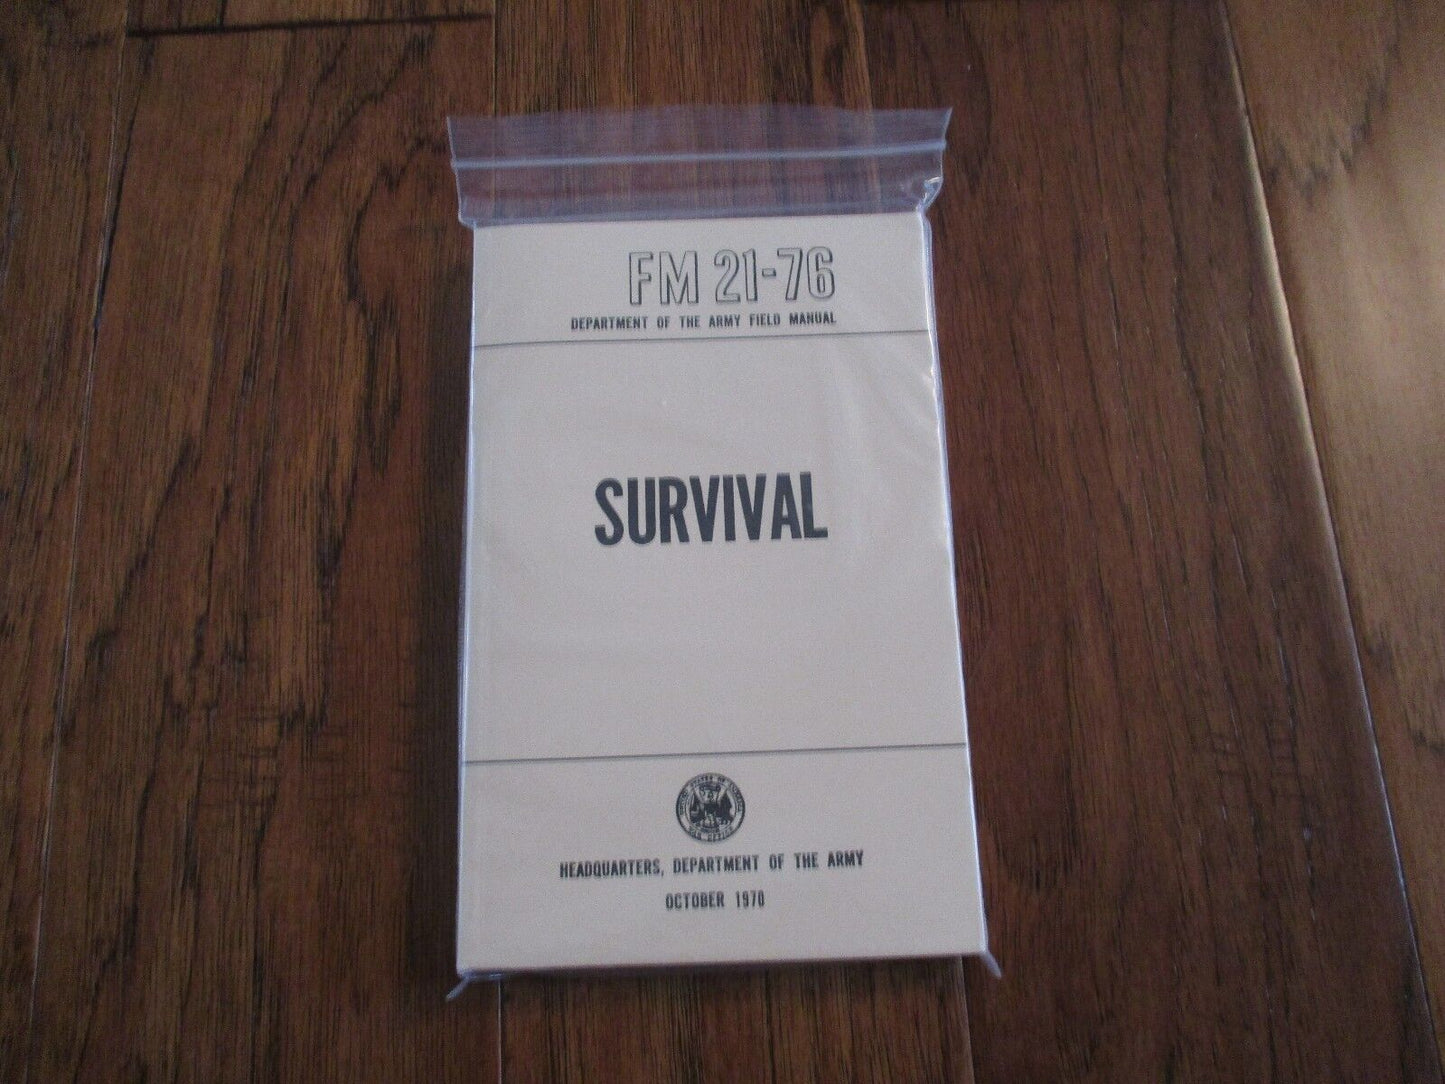 U.S ARMY SURVIVAL HANDBOOK 21-76 ILLUSTRATED 288 PAGES SURVIVALIST GUIDE